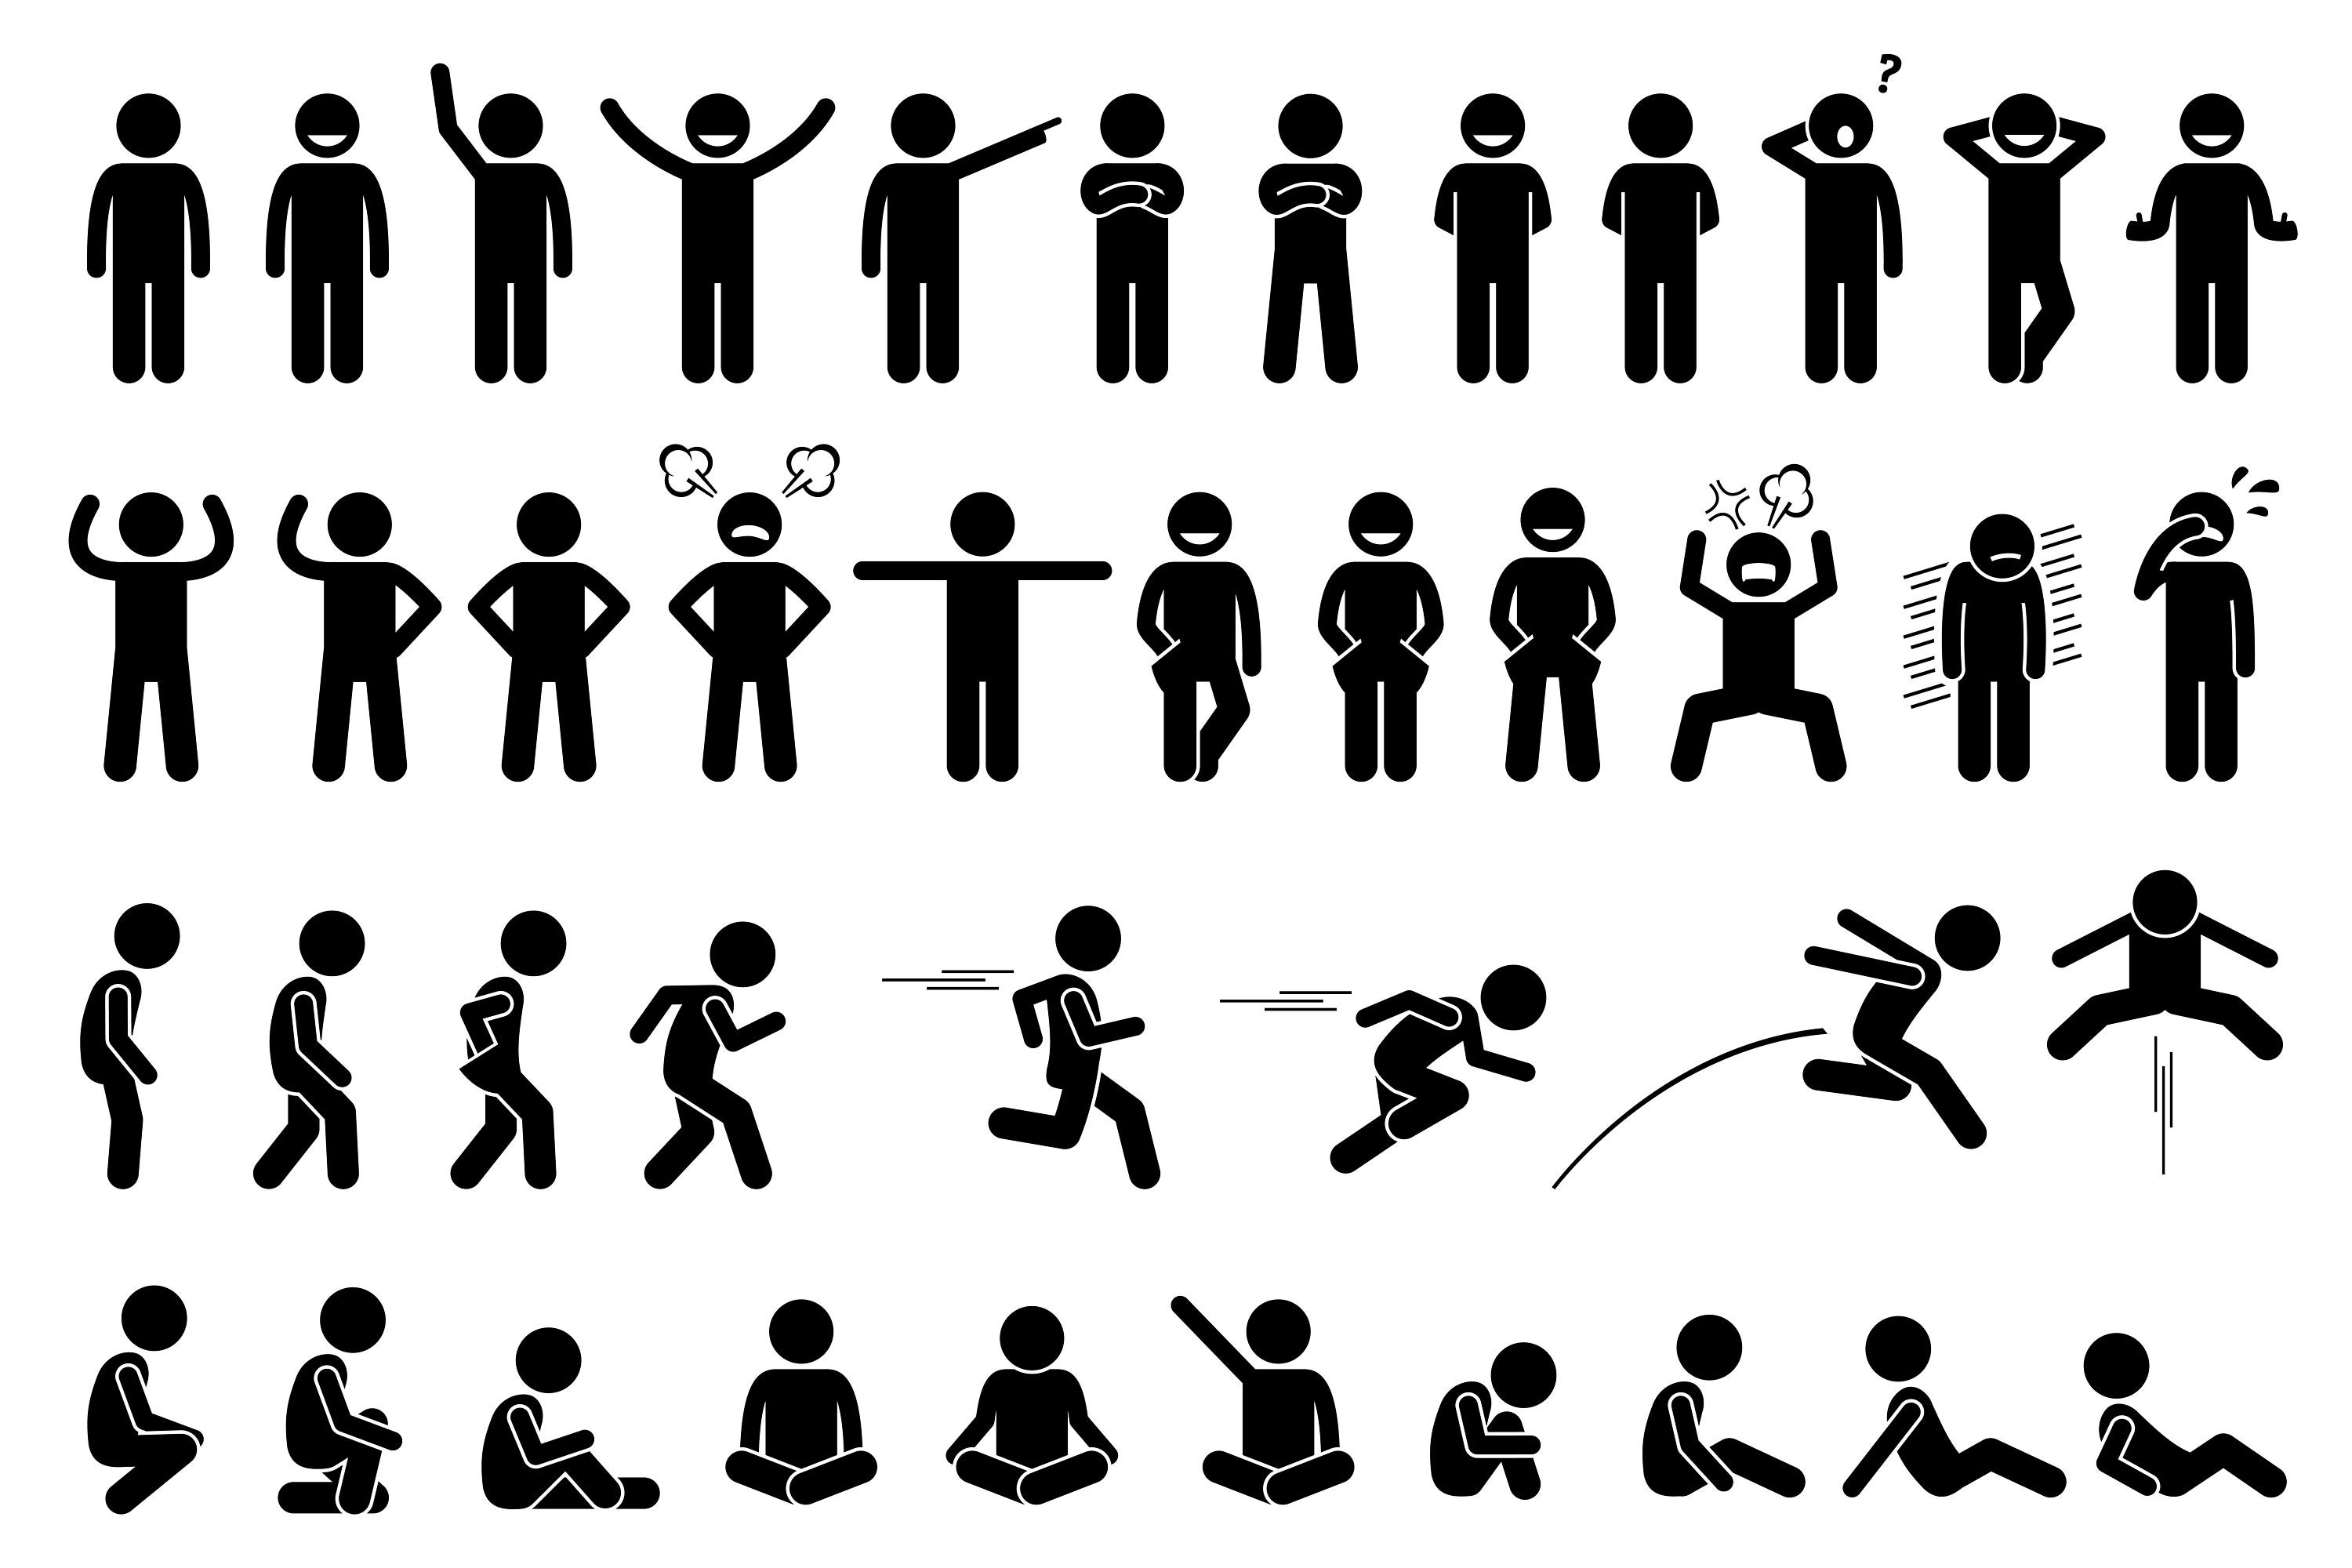 Stick Figure Stickman Stick Man People Person Poses Postures Standing  Walking Running Fast Speed Set Pictogram Download Icons PNG SVG Vector